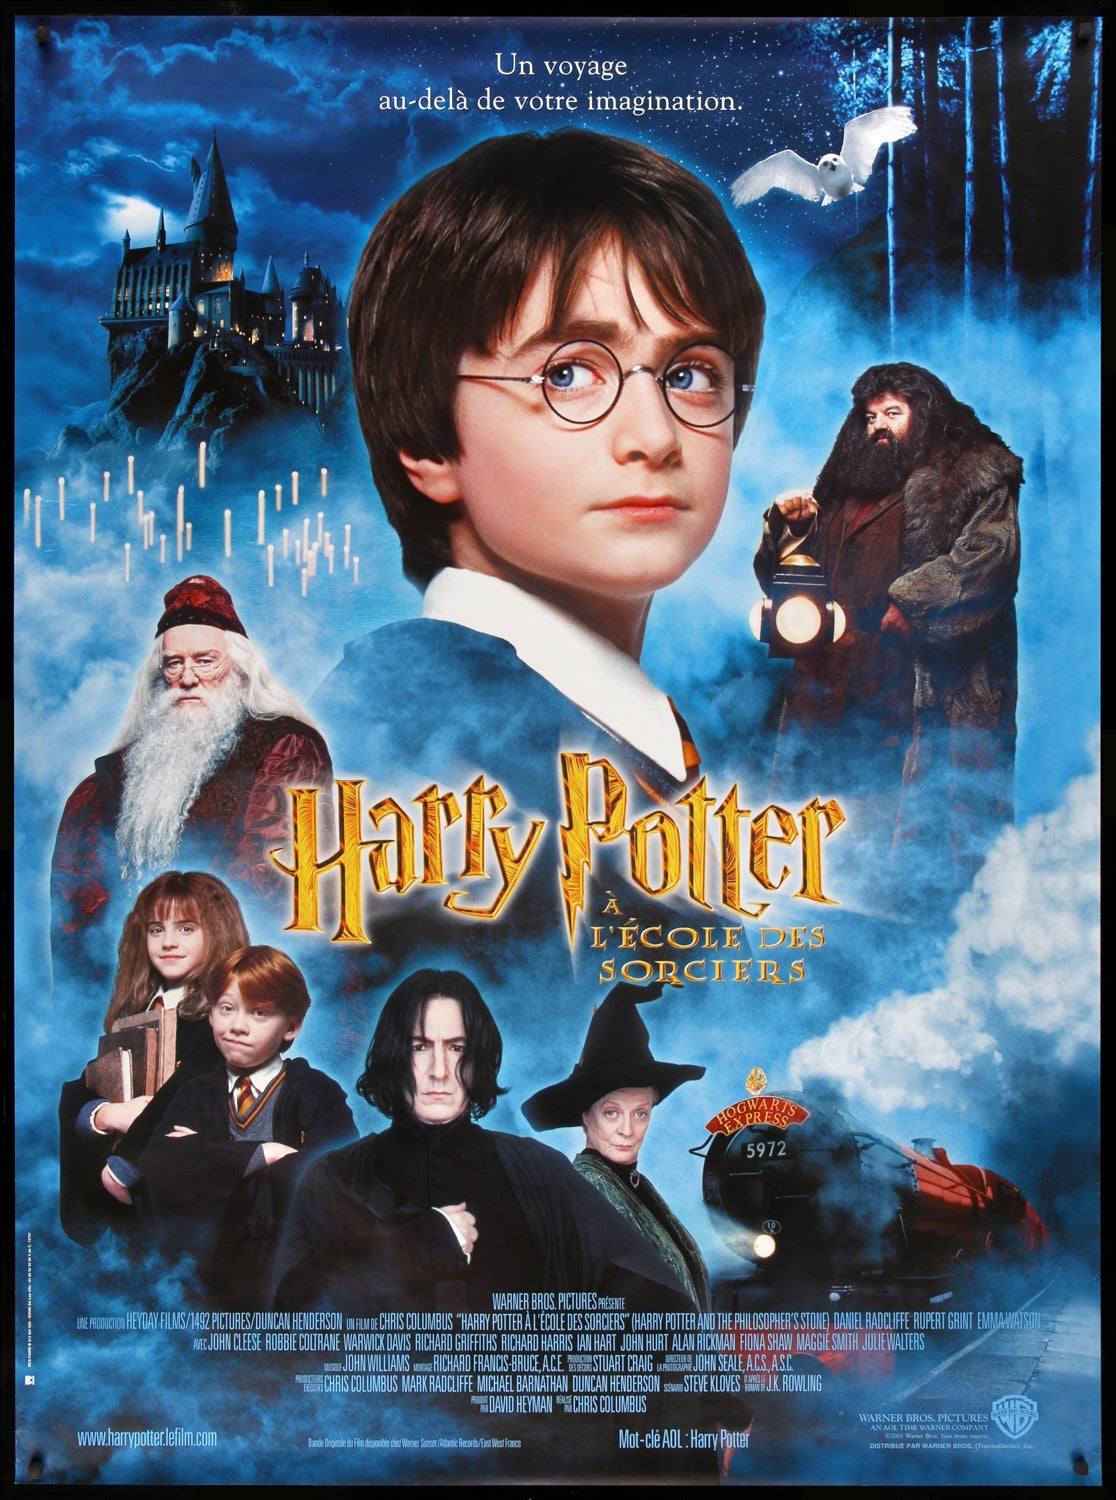 Harry Potter and the Chamber of Secrets Movie Poster 2002 1 Sheet